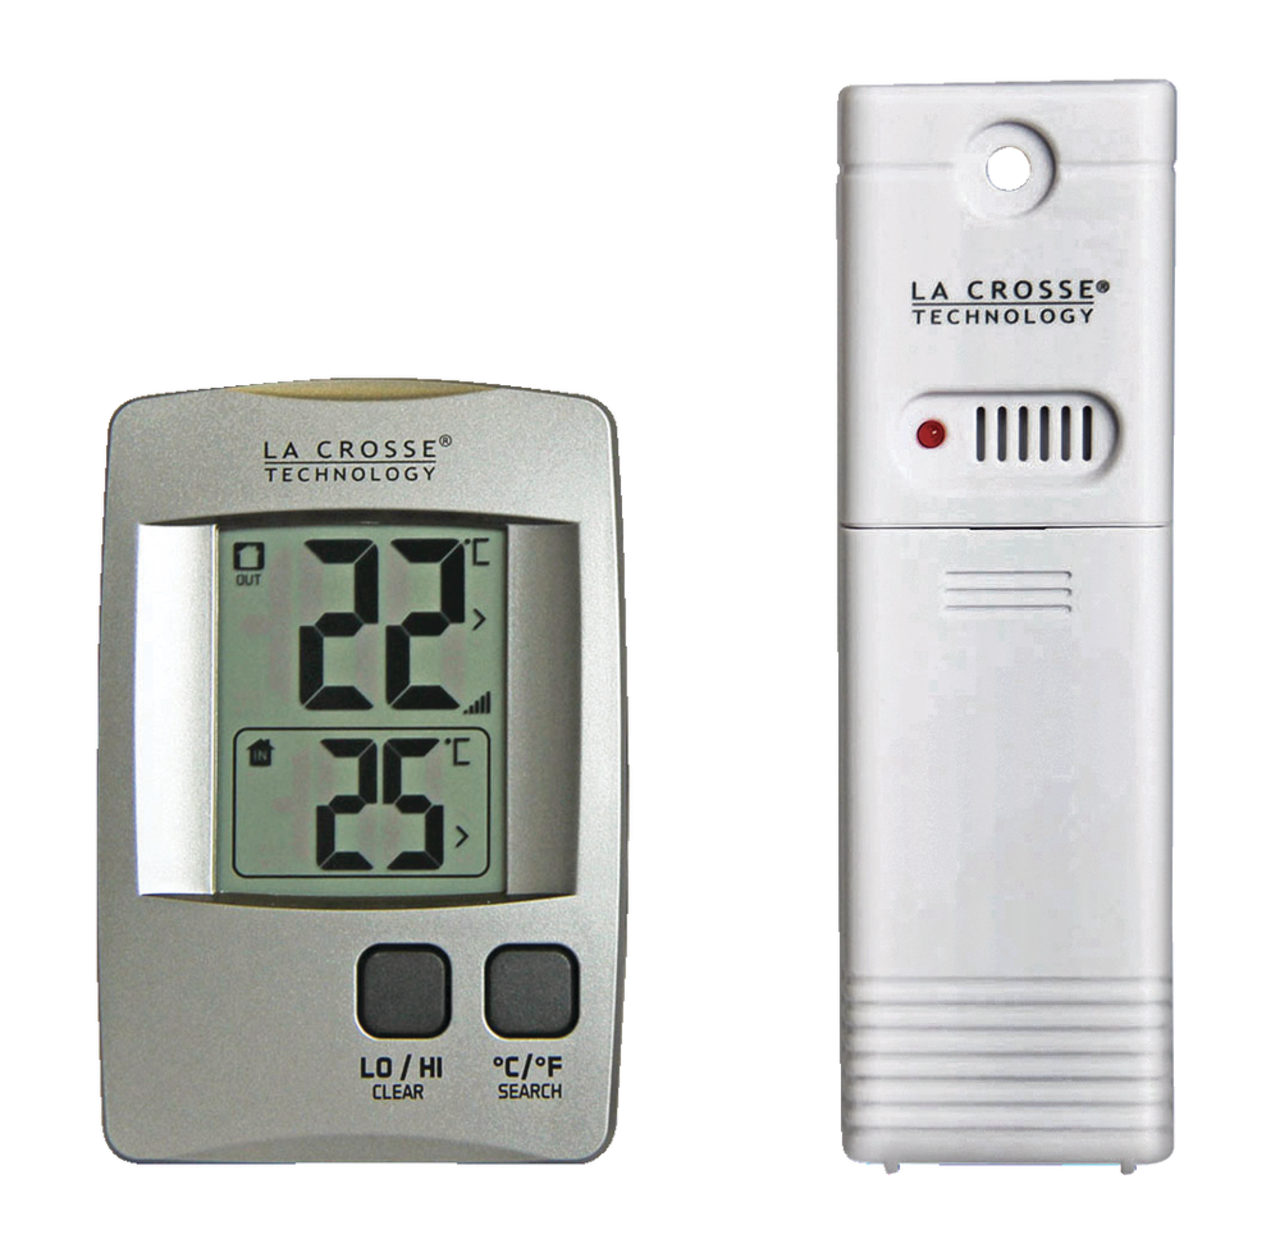 https://media-www.canadiantire.ca/product/living/kitchen/kitchen-tools-thermometers/1427129/lacrosse-wireless-temperature-station-61791d6c-bcdf-4e45-b32a-3d2c00118763.png?imdensity=1&imwidth=1244&impolicy=mZoom